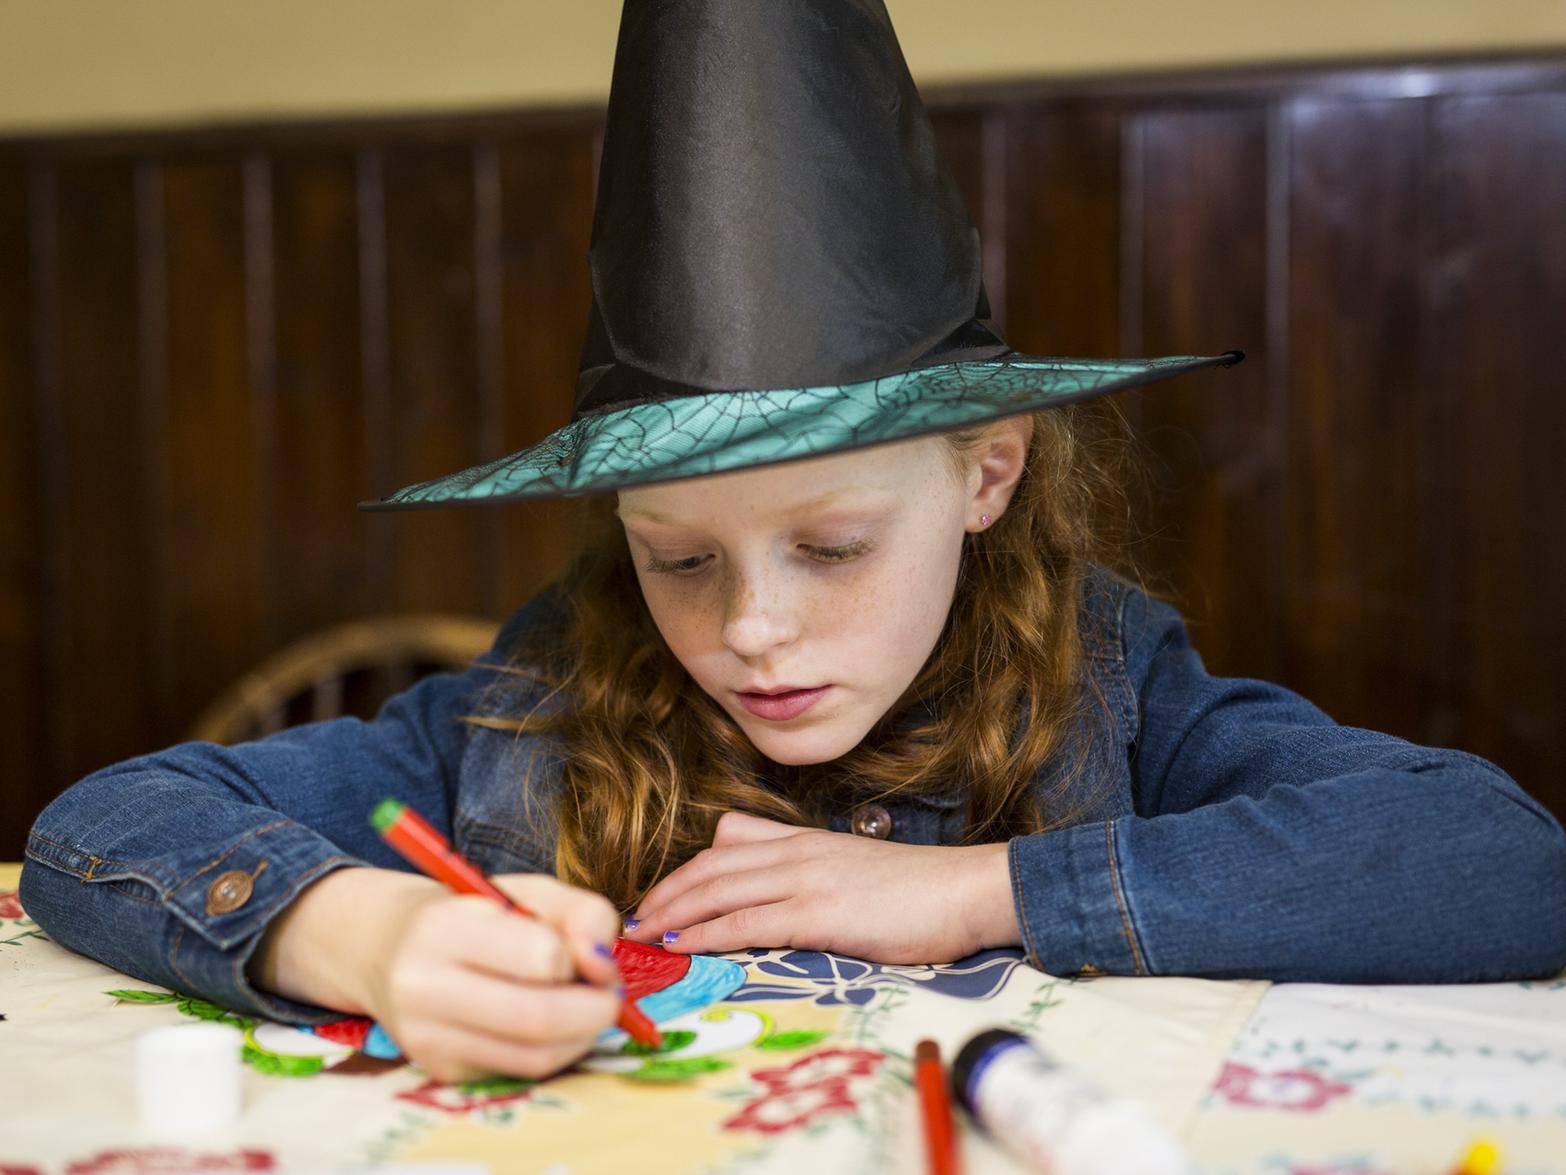 Hosting Haunted Halloween Crafts in its Victorian streets on Oct 29, 10am until 4pm. Also Spooky Silly Science on Oct 30 from 10am until 12pm and 2pm until 4pm. Also a Monster Mash Up on Nov 1 from 10am until 4pm.